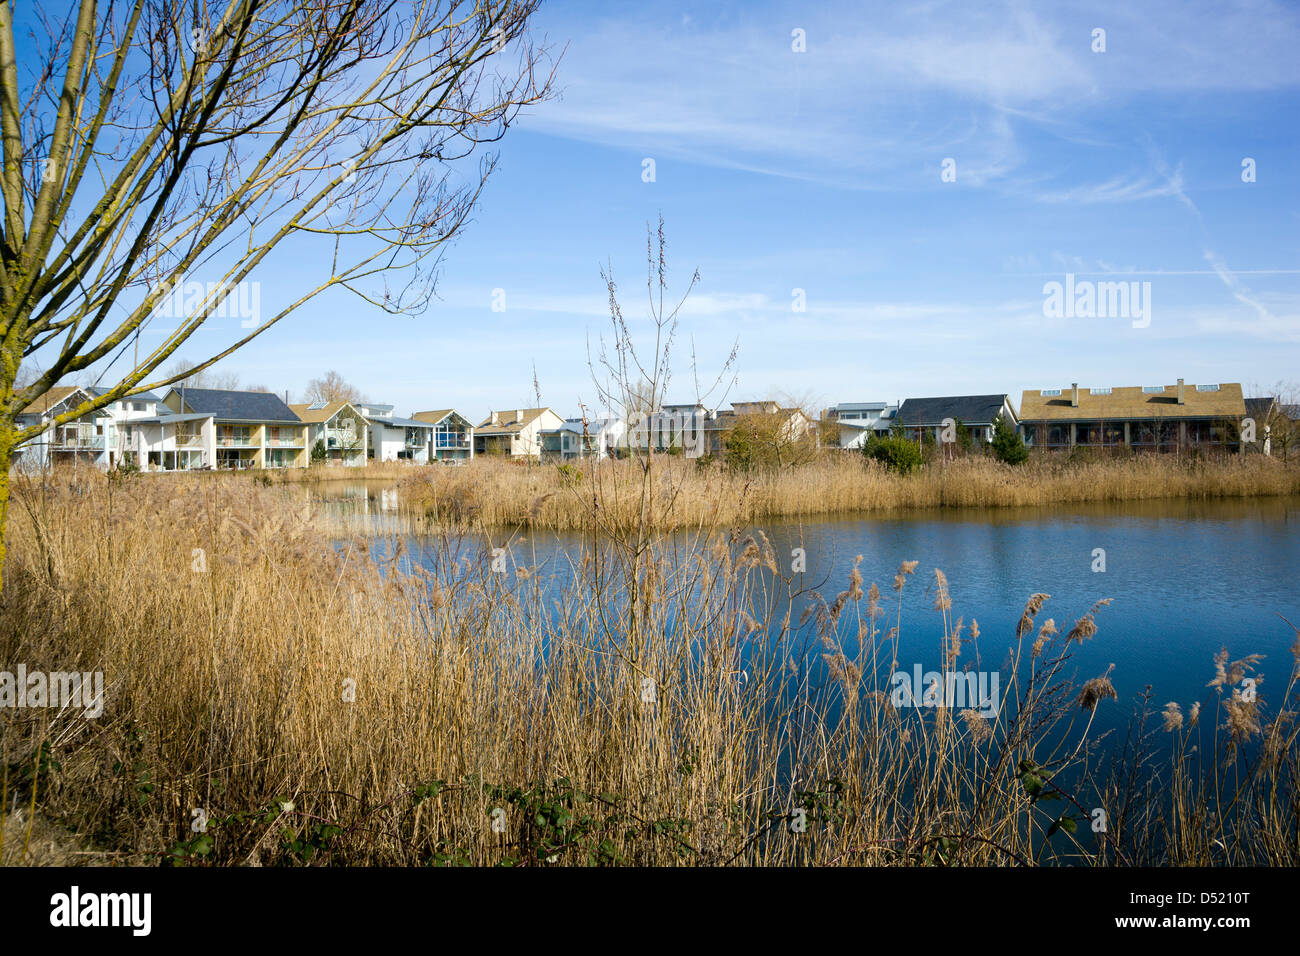 Holiday homes on the other side of one of the lakes on the Lower Mill Estate development in the Cotswold Water Park, Gloucestershire, England, UK Stock Photo